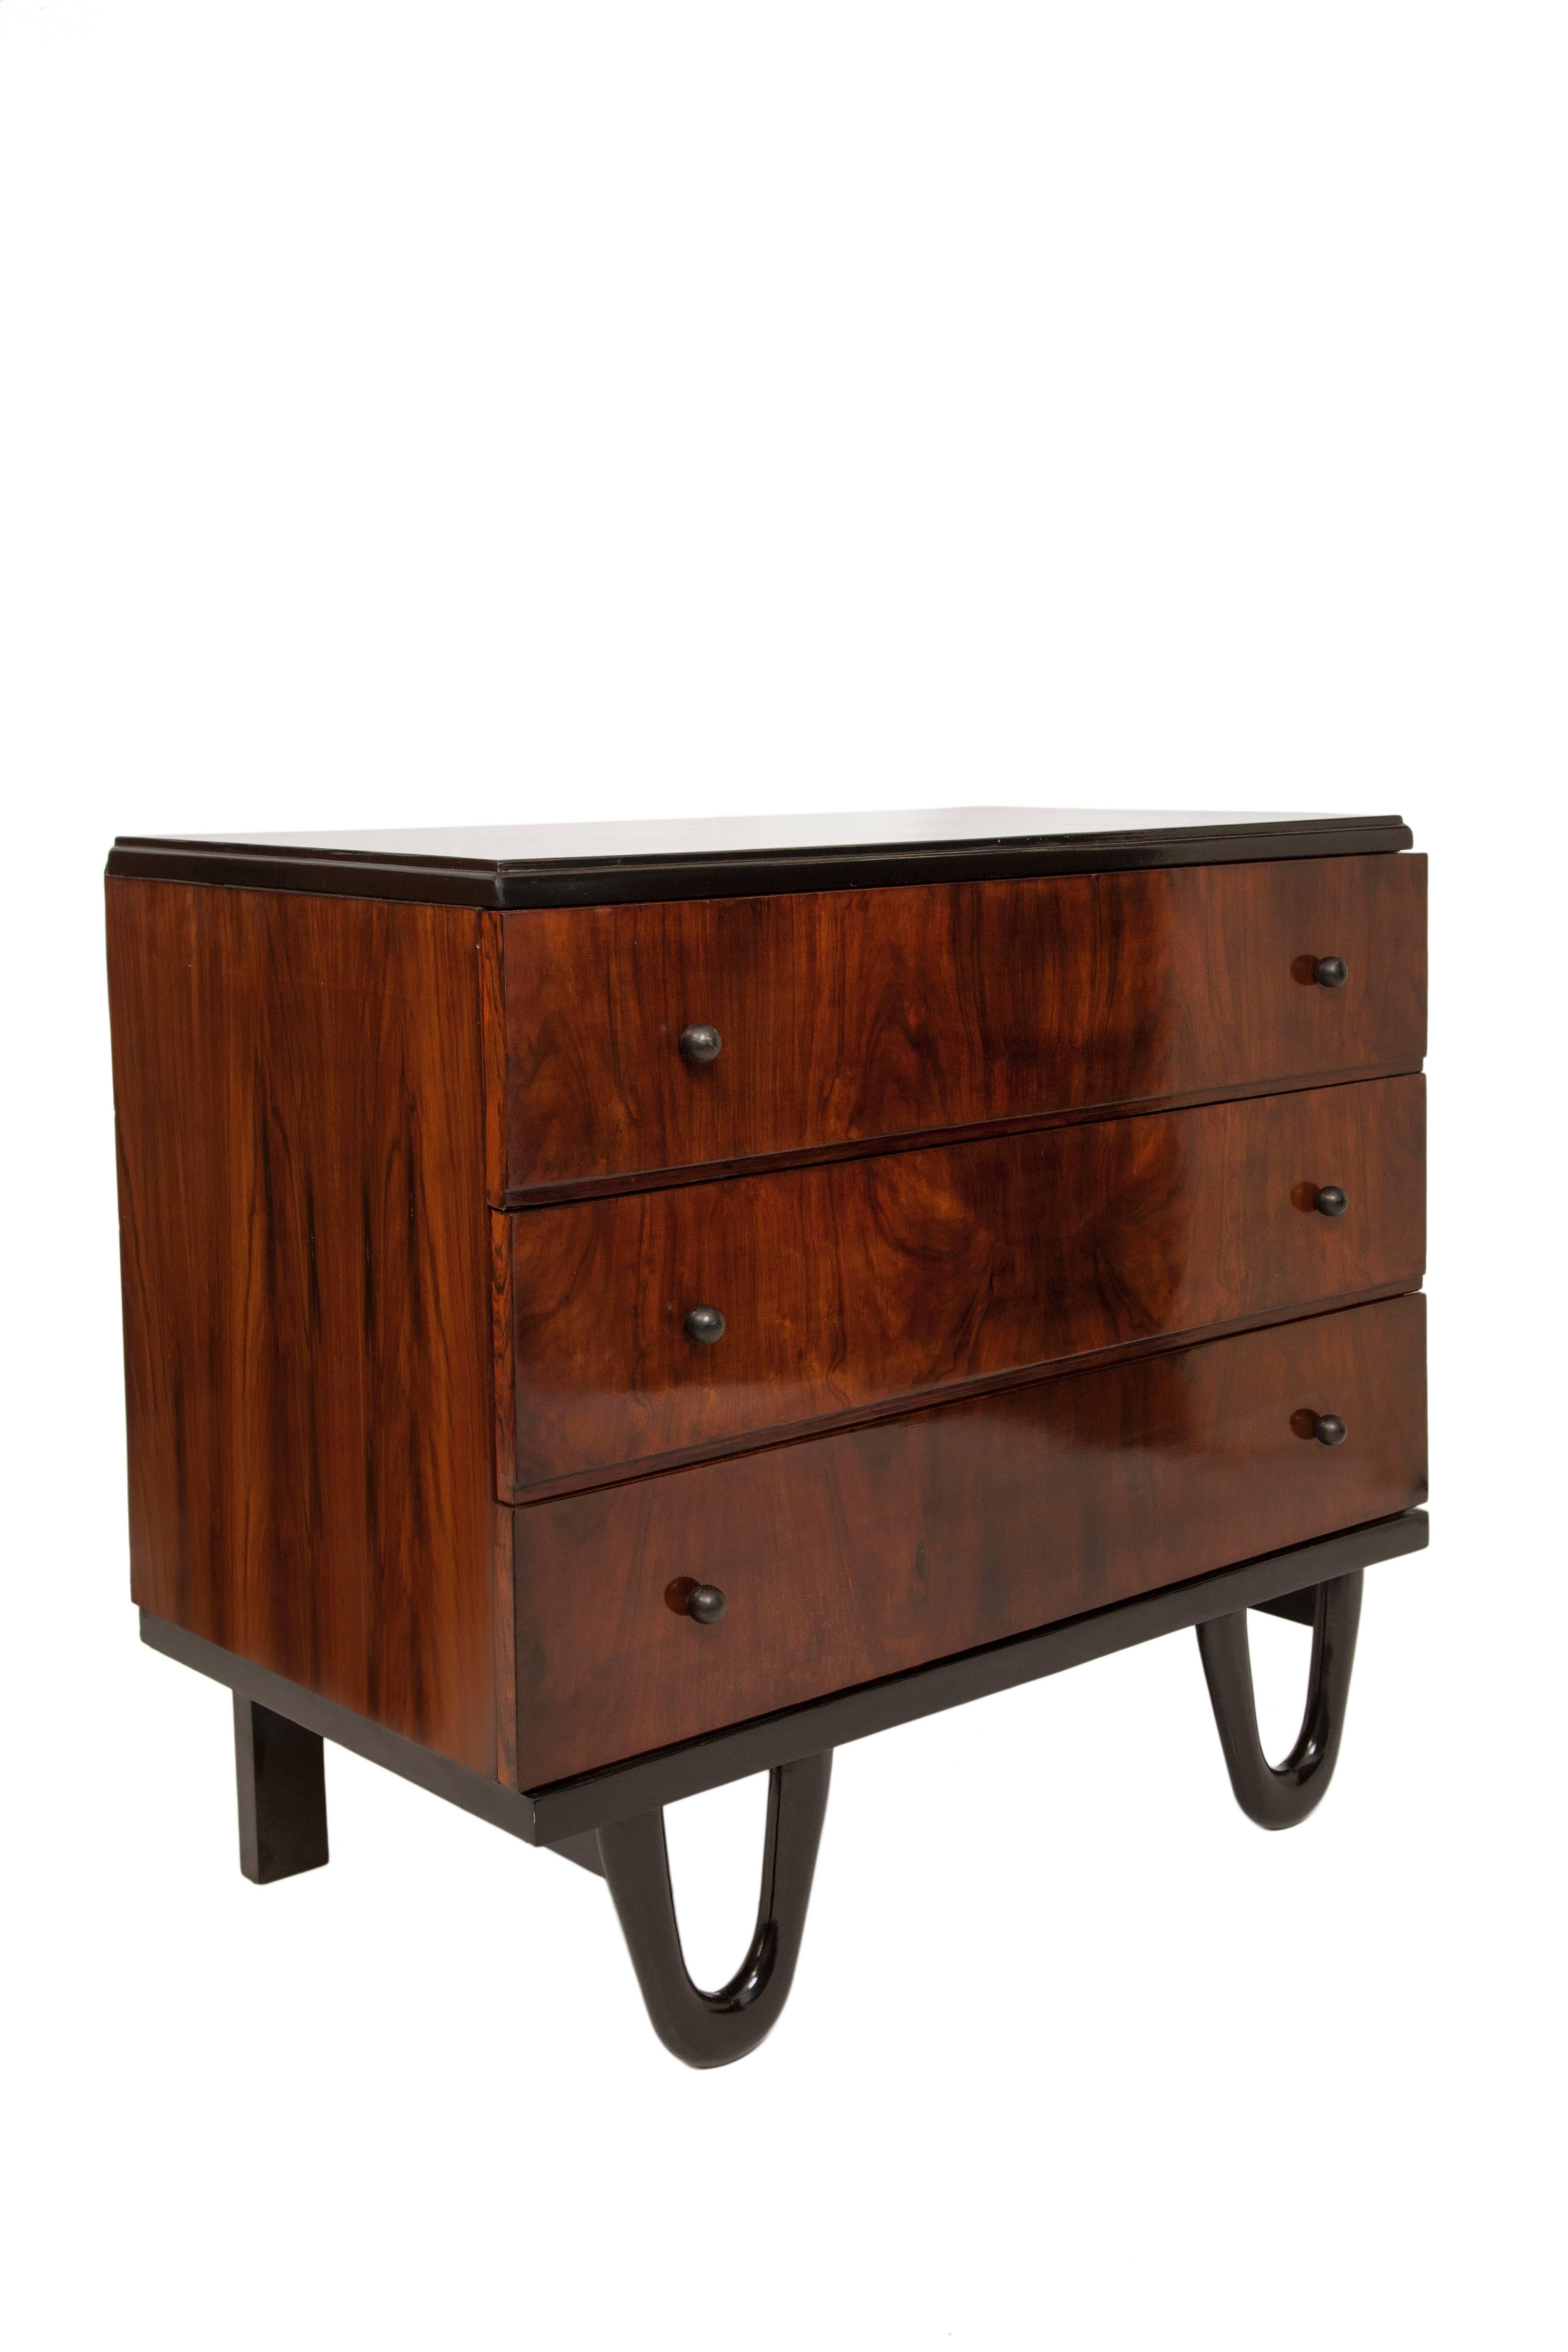 A small scale vintage chest of drawers, produced circa 1960s, in Brazilian jacaranda wood, with three exterior drawers, each with round knob pulls, on unusually looped feet to the front. Very good vintage condition, consistent with age and use.